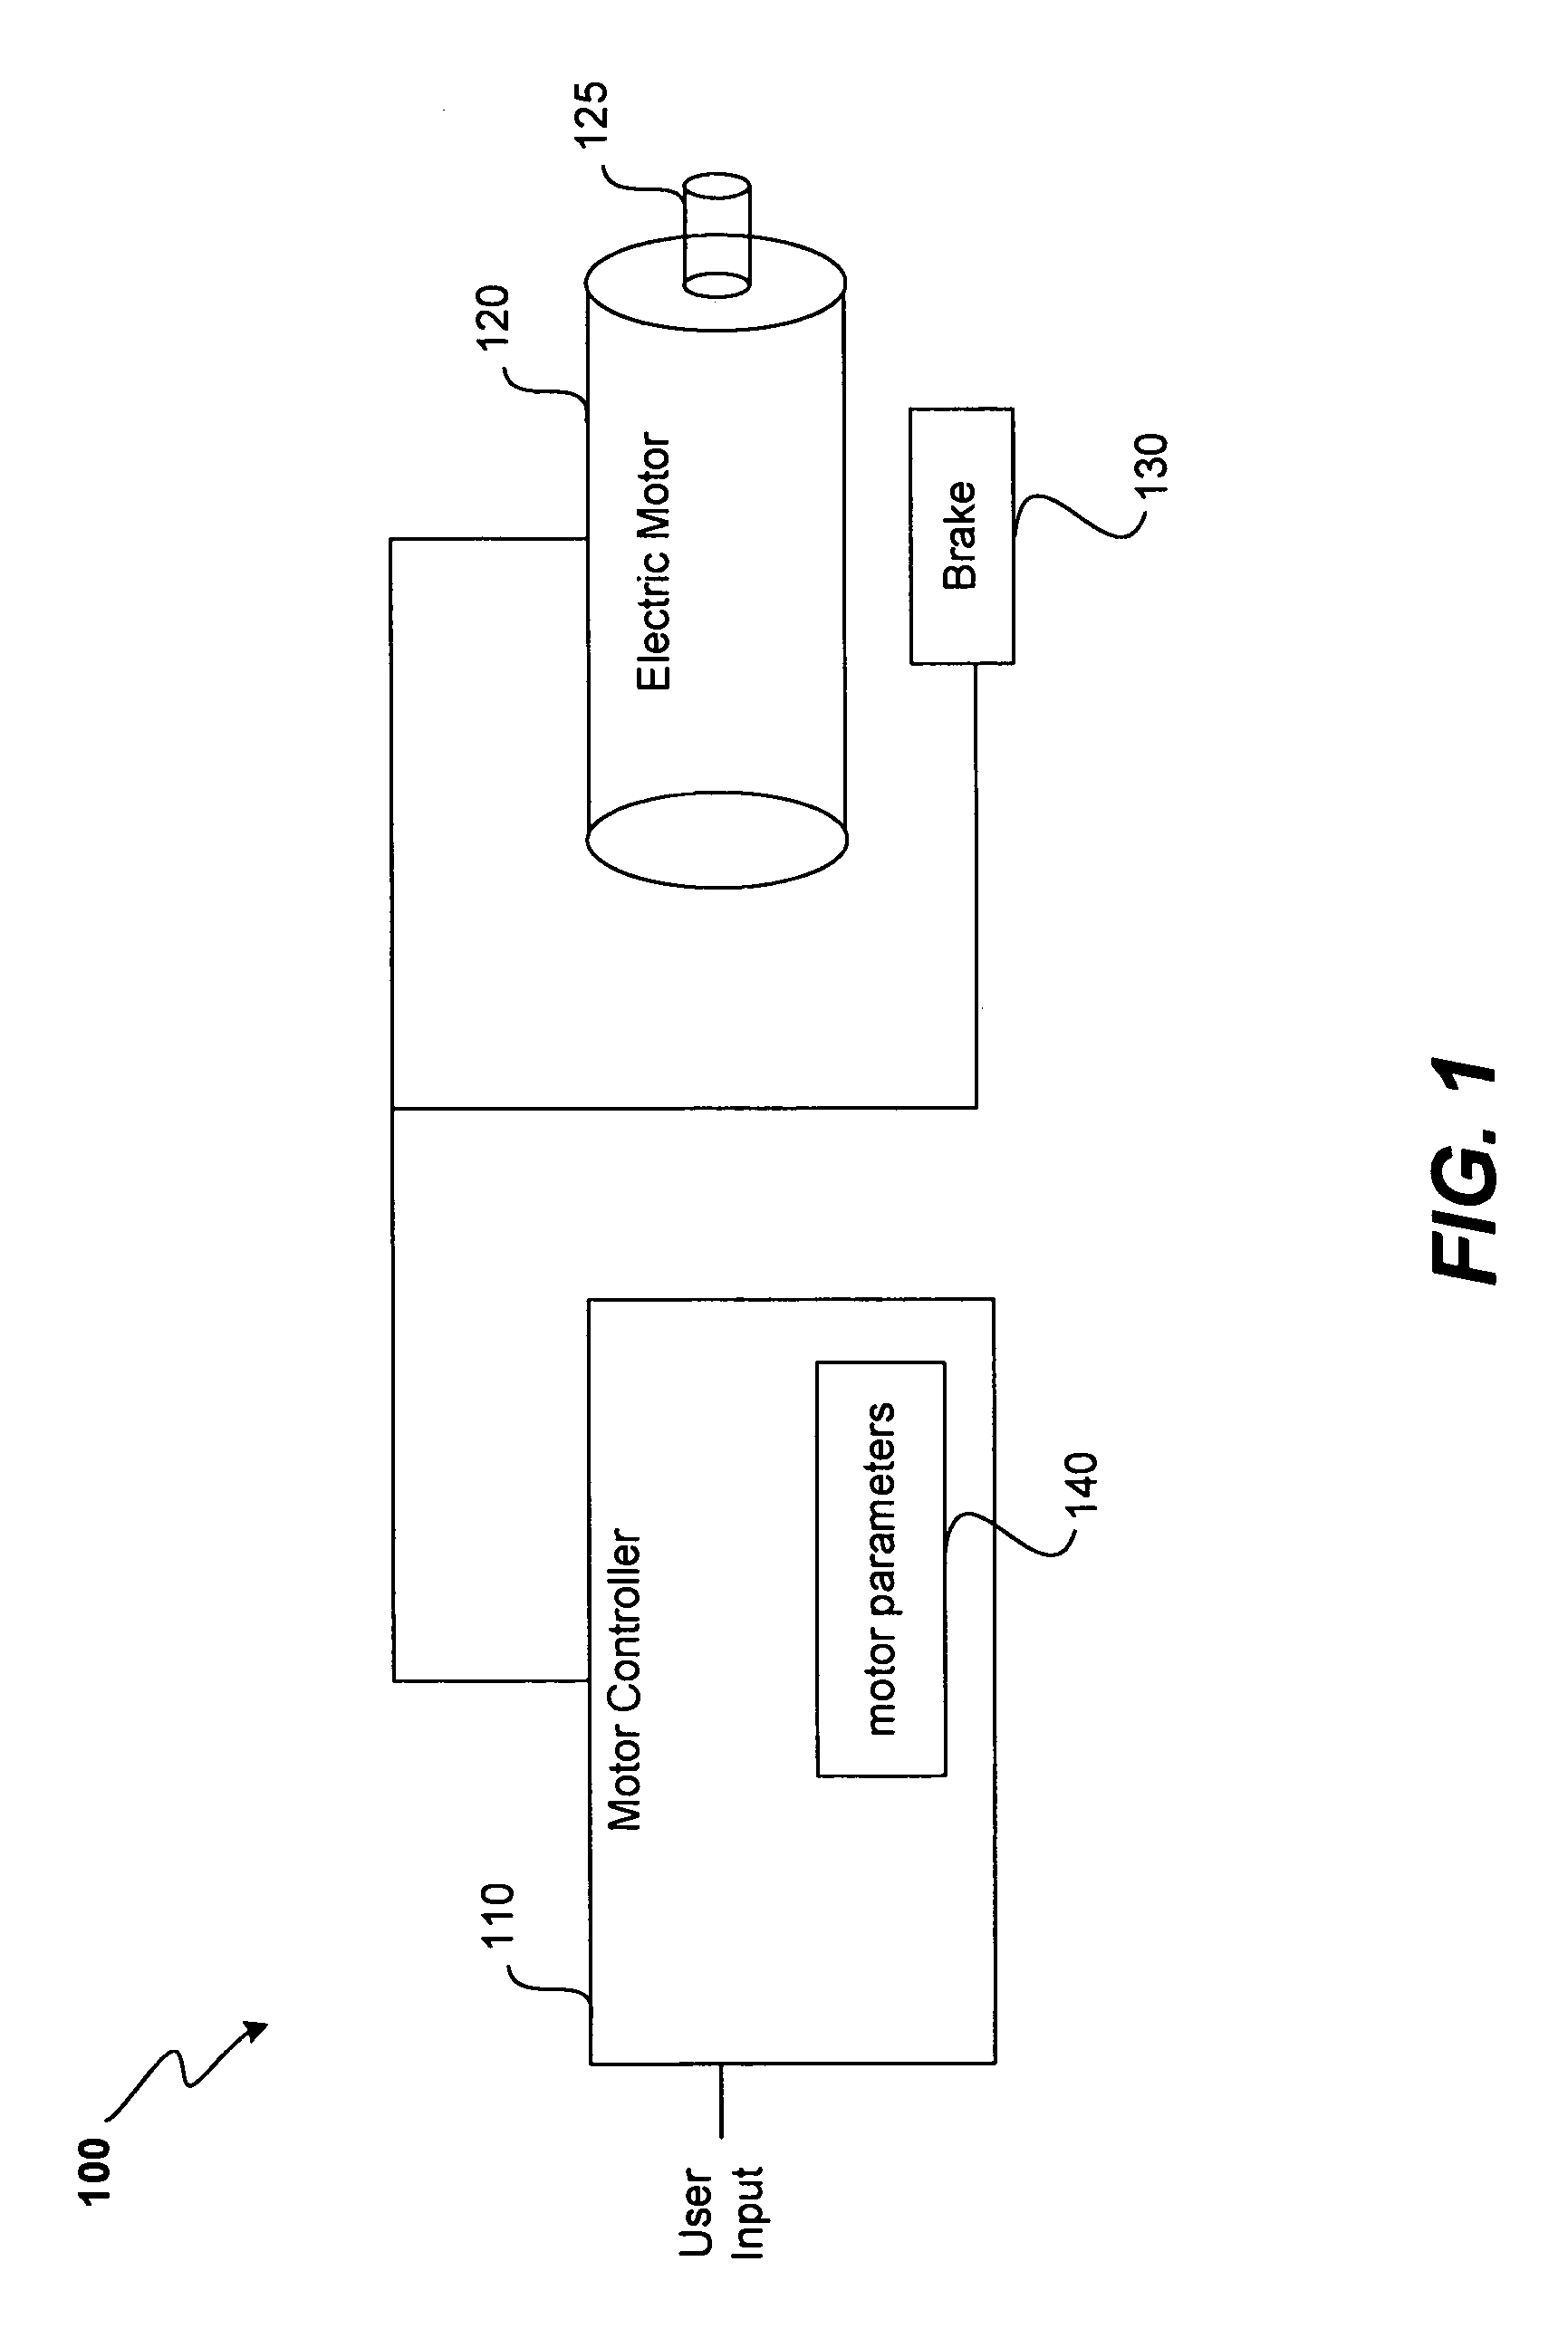 Systems and methods for dynamically compensating motor resistance in electric motors